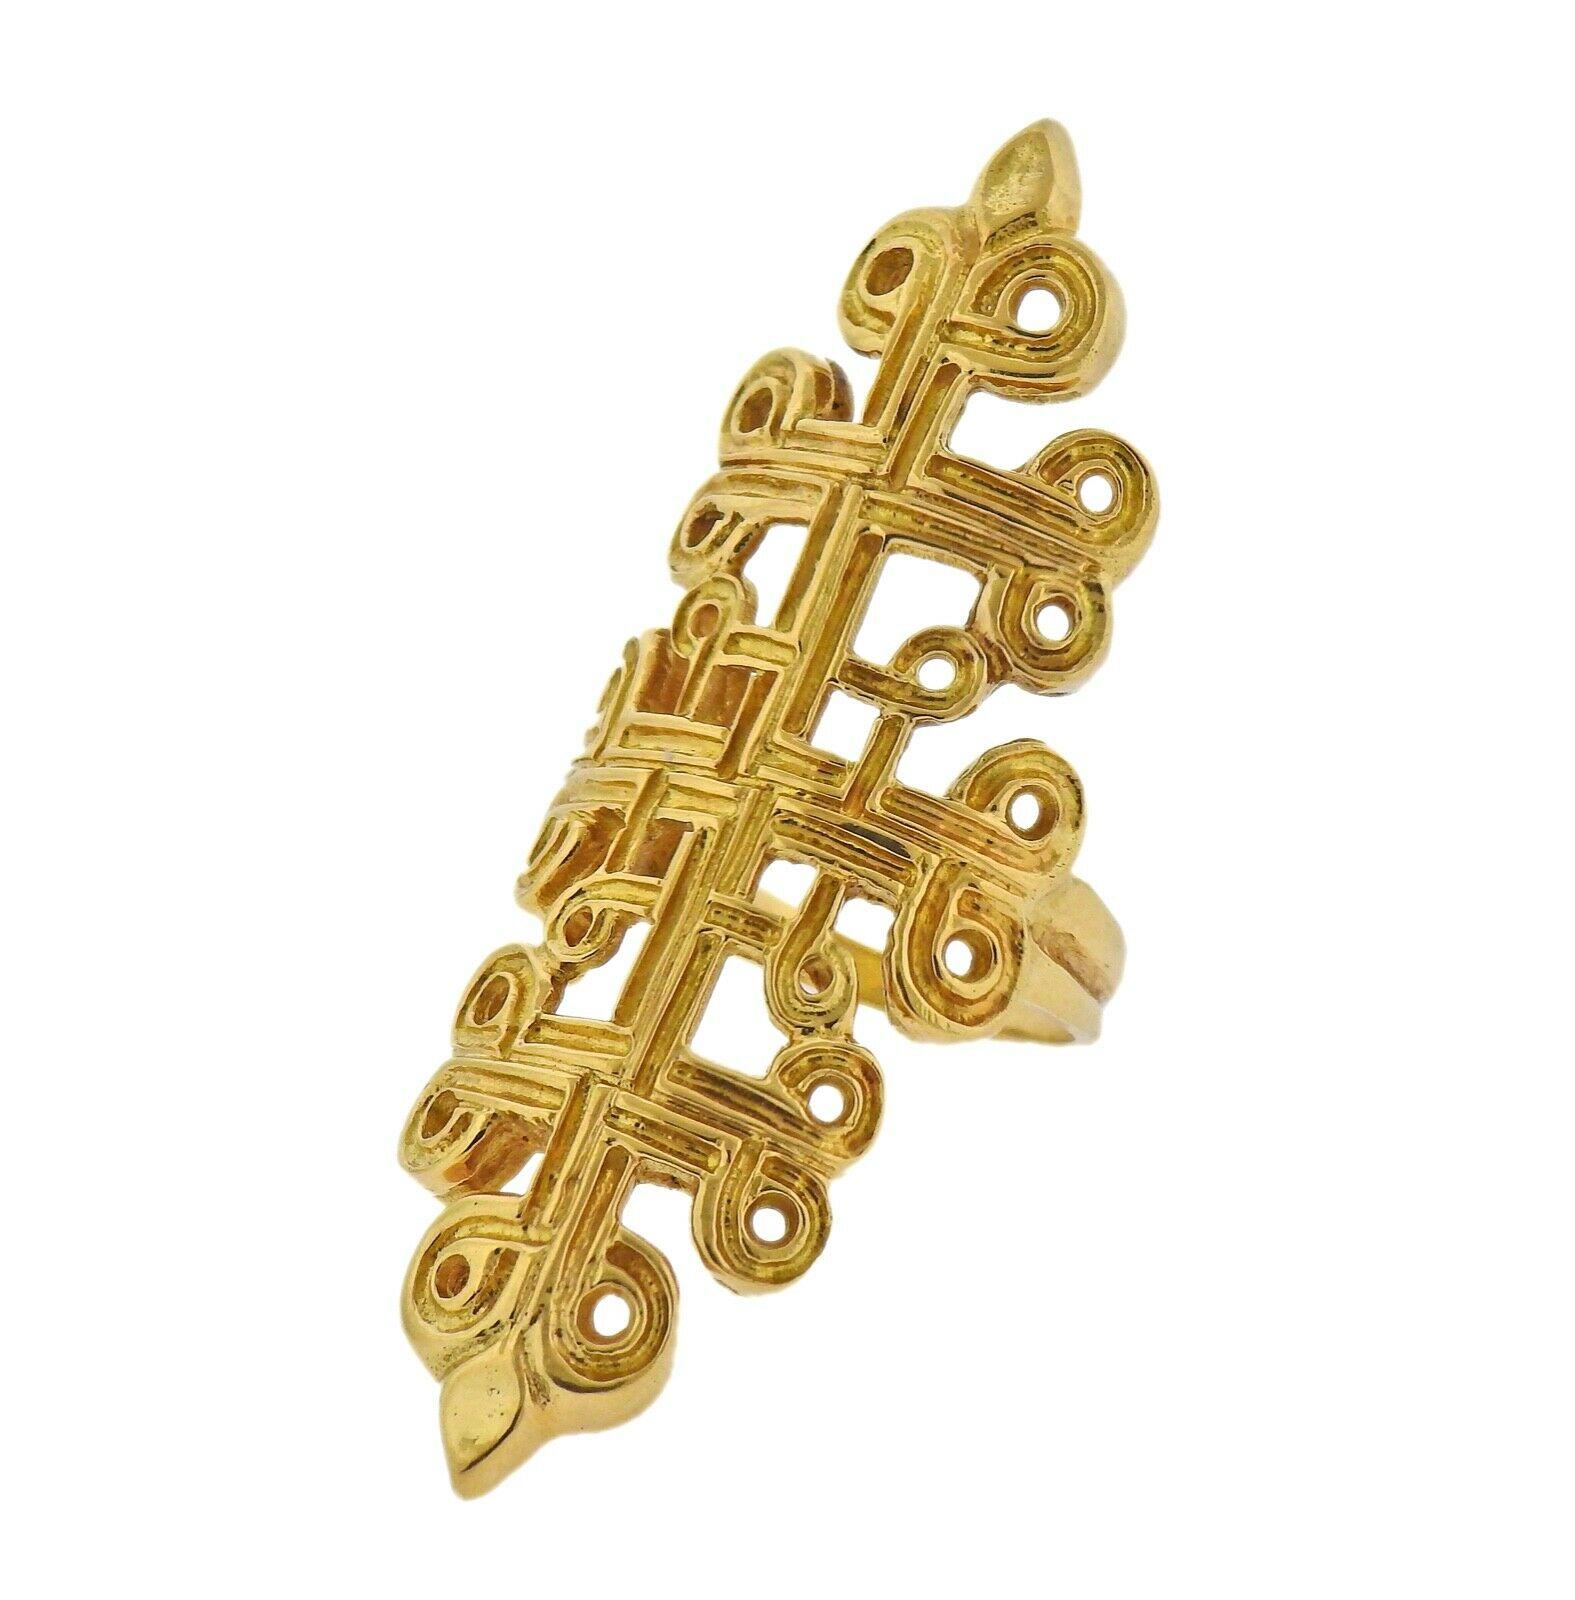 Large 18k yellow gold Byzantine ring by Greek designer Ilias Lalaounis. Ring size - 7.25, ring top - 53mm x 21mm.  Weight - 13.9 grams. Marked: Lalaounis, A21, Maker's mark, 750.